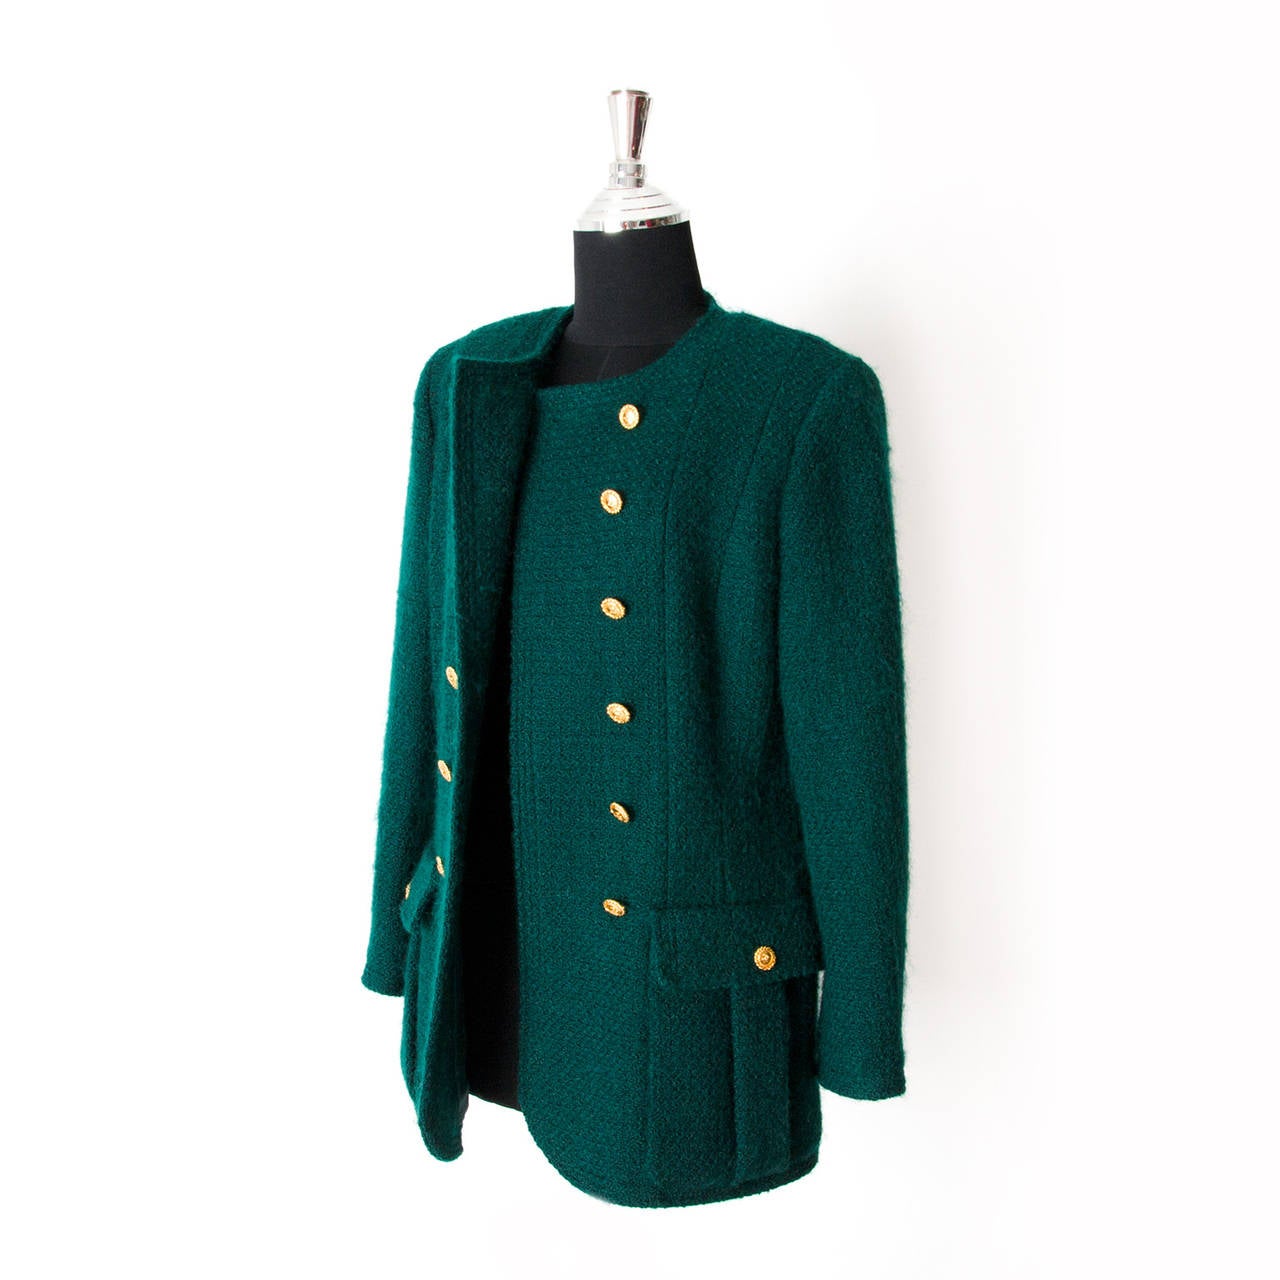 Chanel Double Breasted Green Jacket

This piece is a plus in any wardrobe.

This vibrant green tweed jacket with golden details makes this Chanel jacket a beautiful and unexpected choice, perfect for any occasion.

The jacket is fitted at the